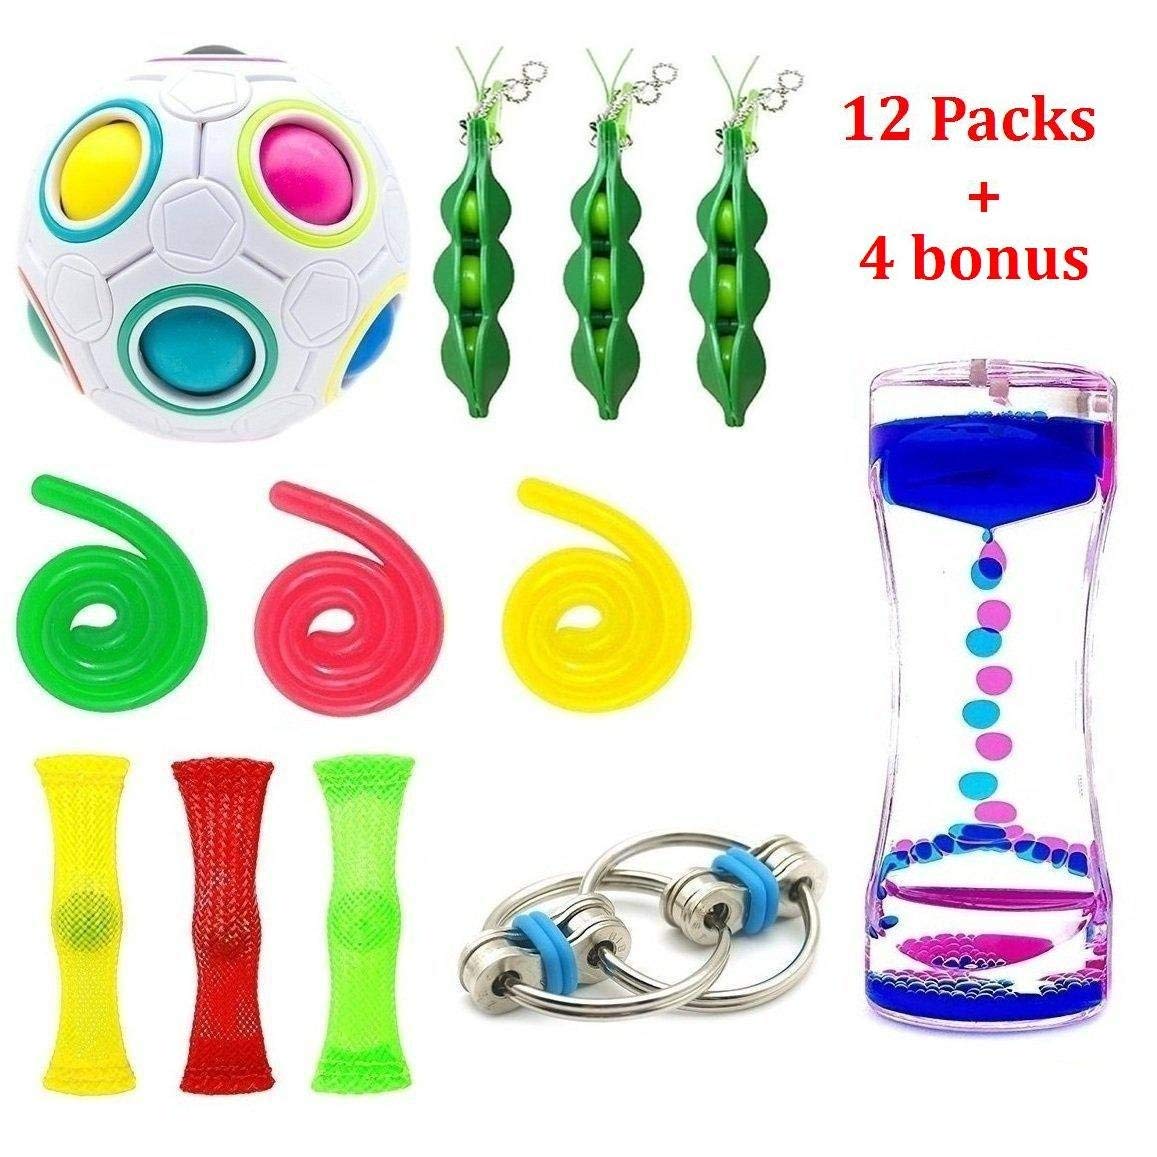 SpringFly 16 Pack Bundle Sensory Toys-Liquid Motion Timer/Rainbow Magic Balls/Bike Chain/Mesh And Marble Toy/Squeeze-a-Bean Soybean/Stretch String Toy for ADD ADHD Stress Relax